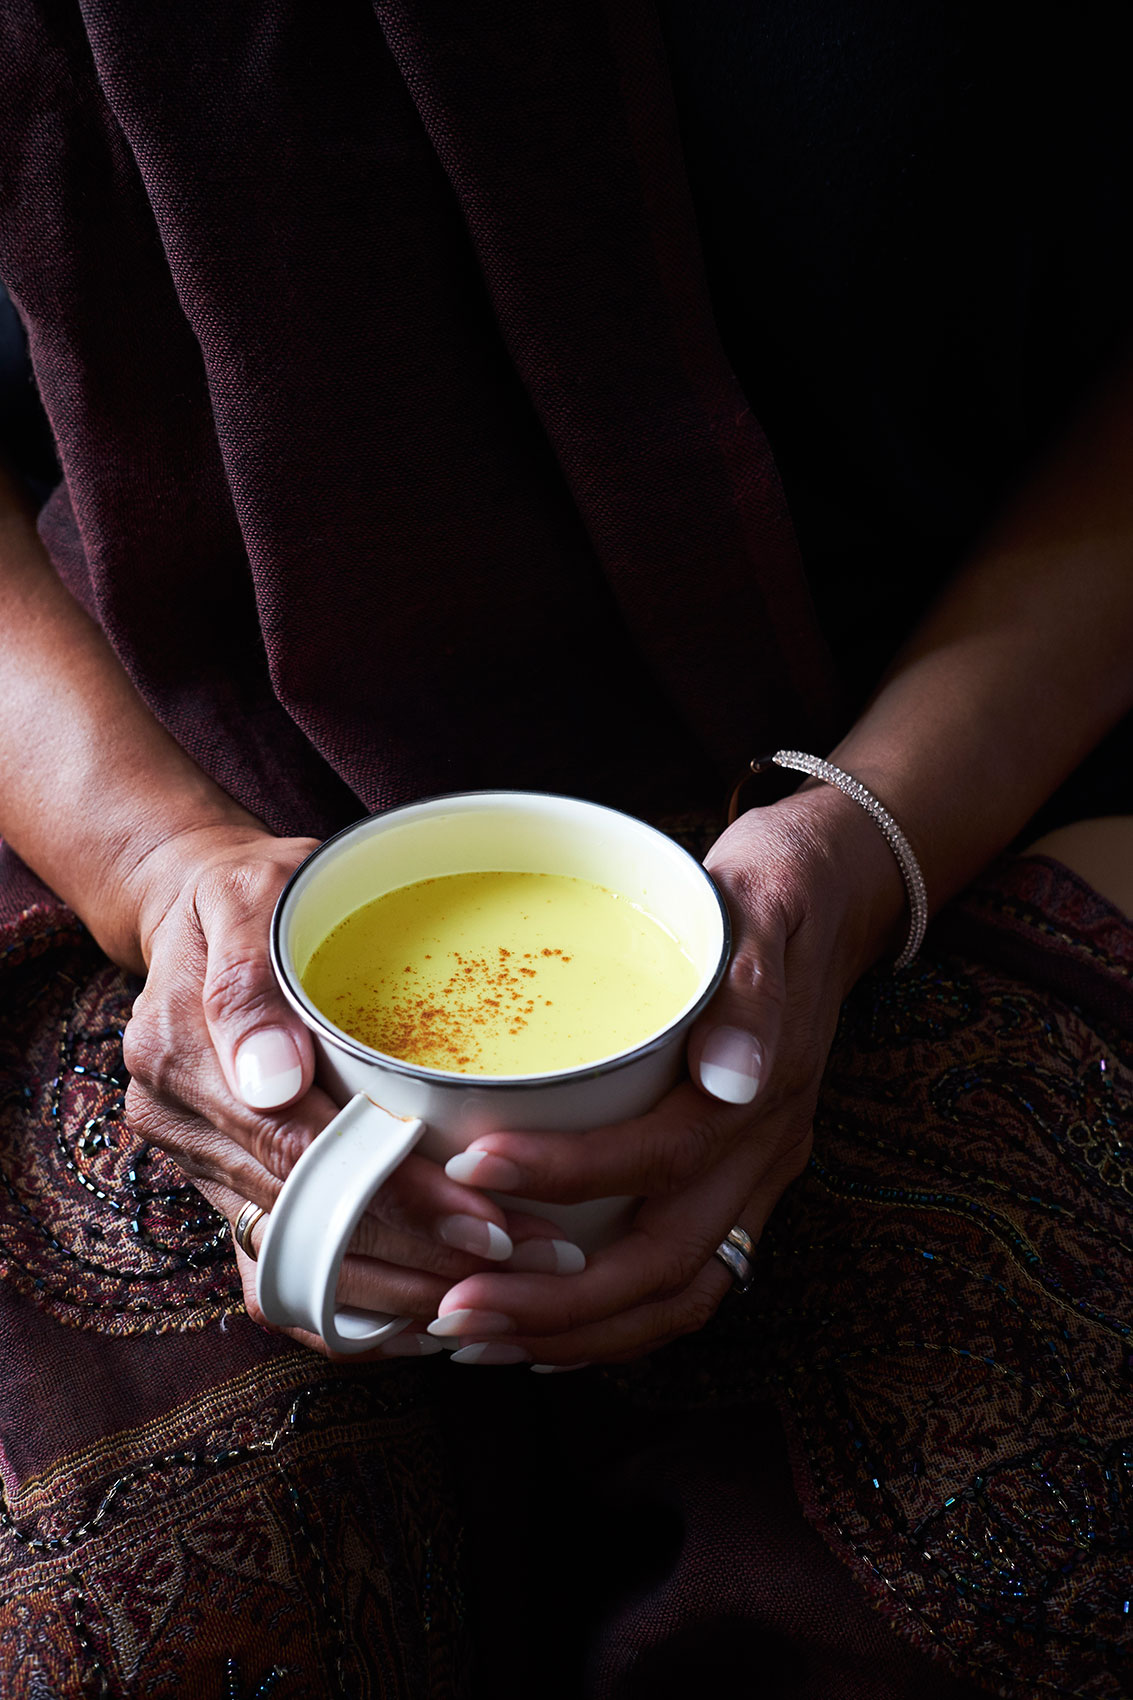 My Indian Kitchen • Spicy Turmeric Latte in White Mug • Cookbook & Editorial Food Photography